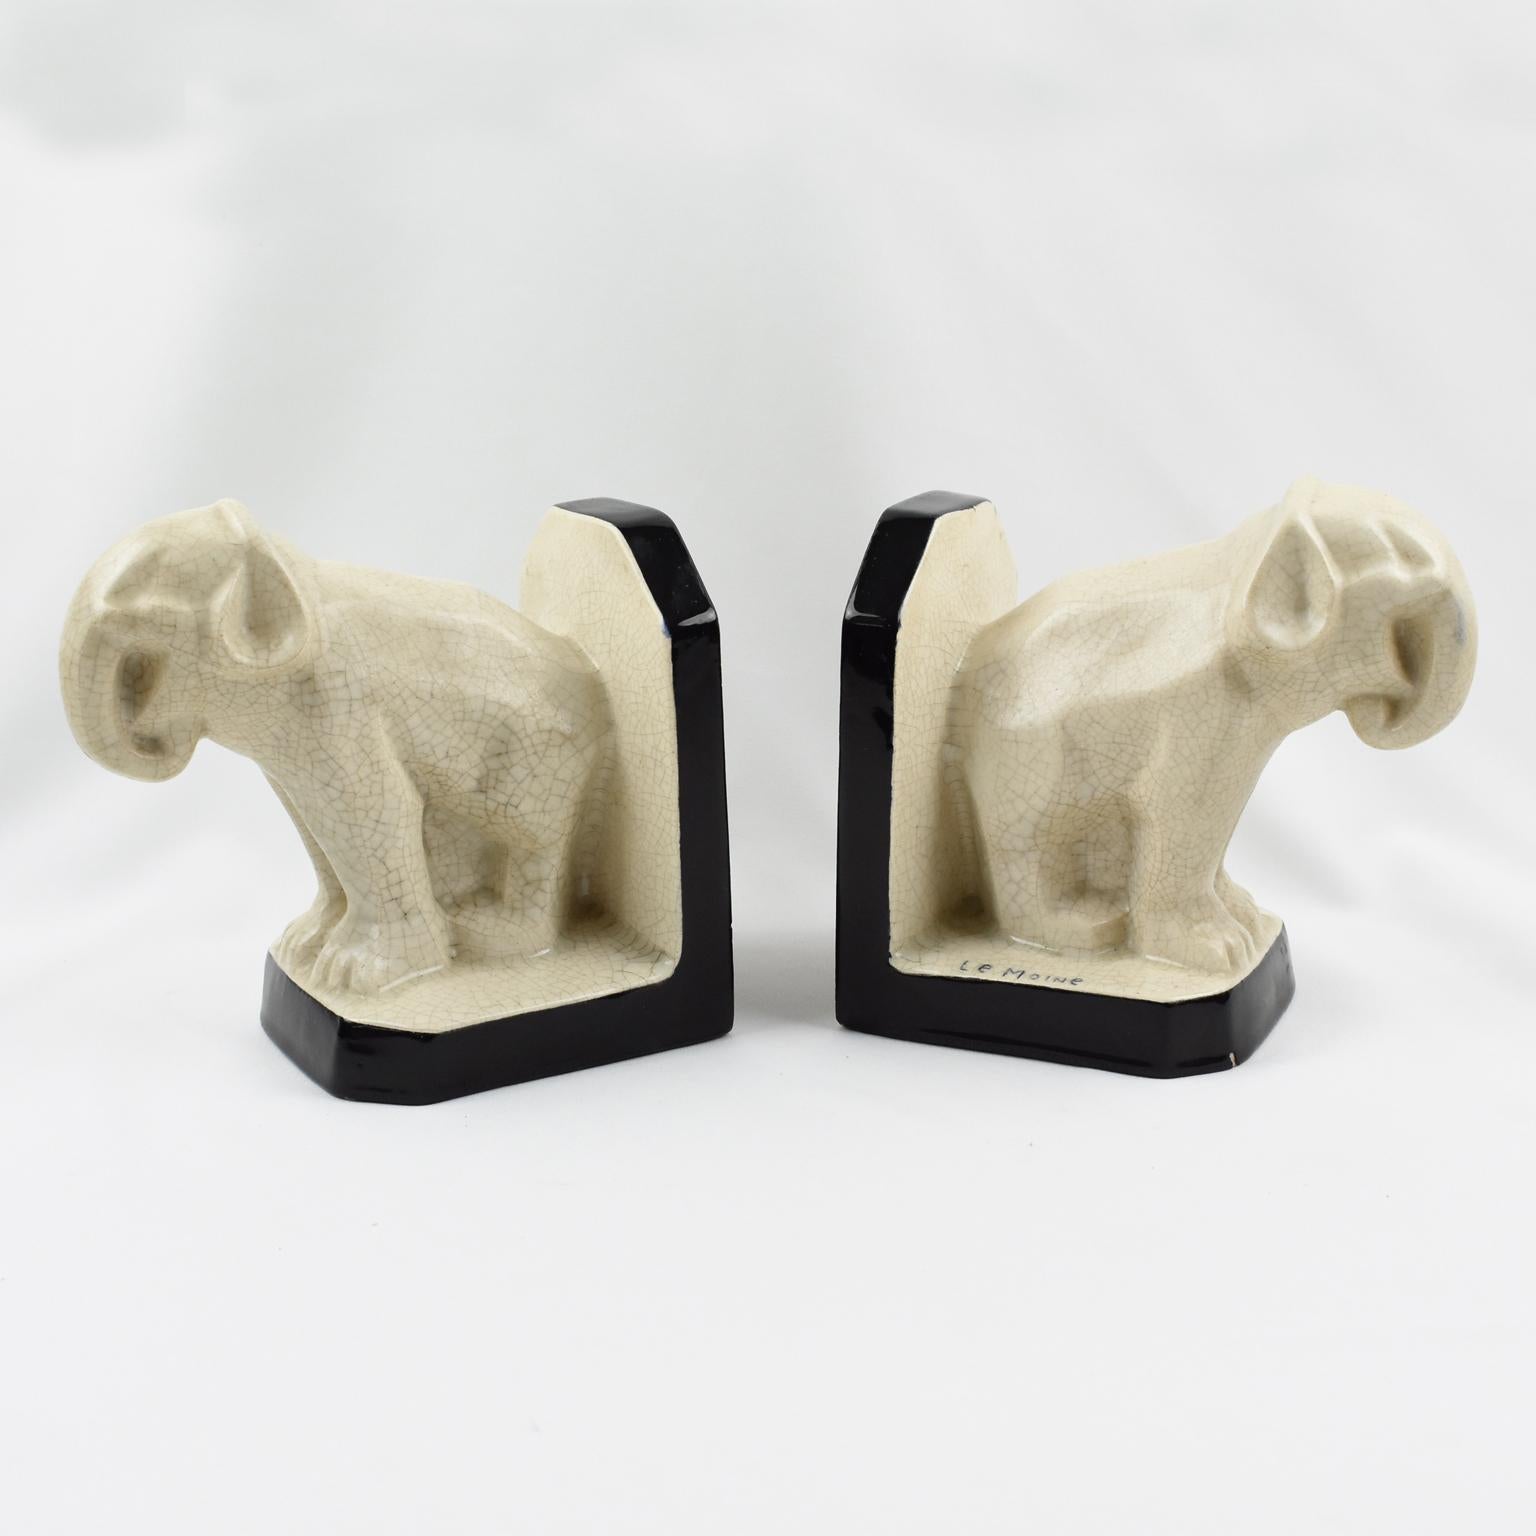 Art Deco Crackle Ceramic Elephant Sculpture Bookends by Le Moine, France 1930s In Good Condition For Sale In Atlanta, GA